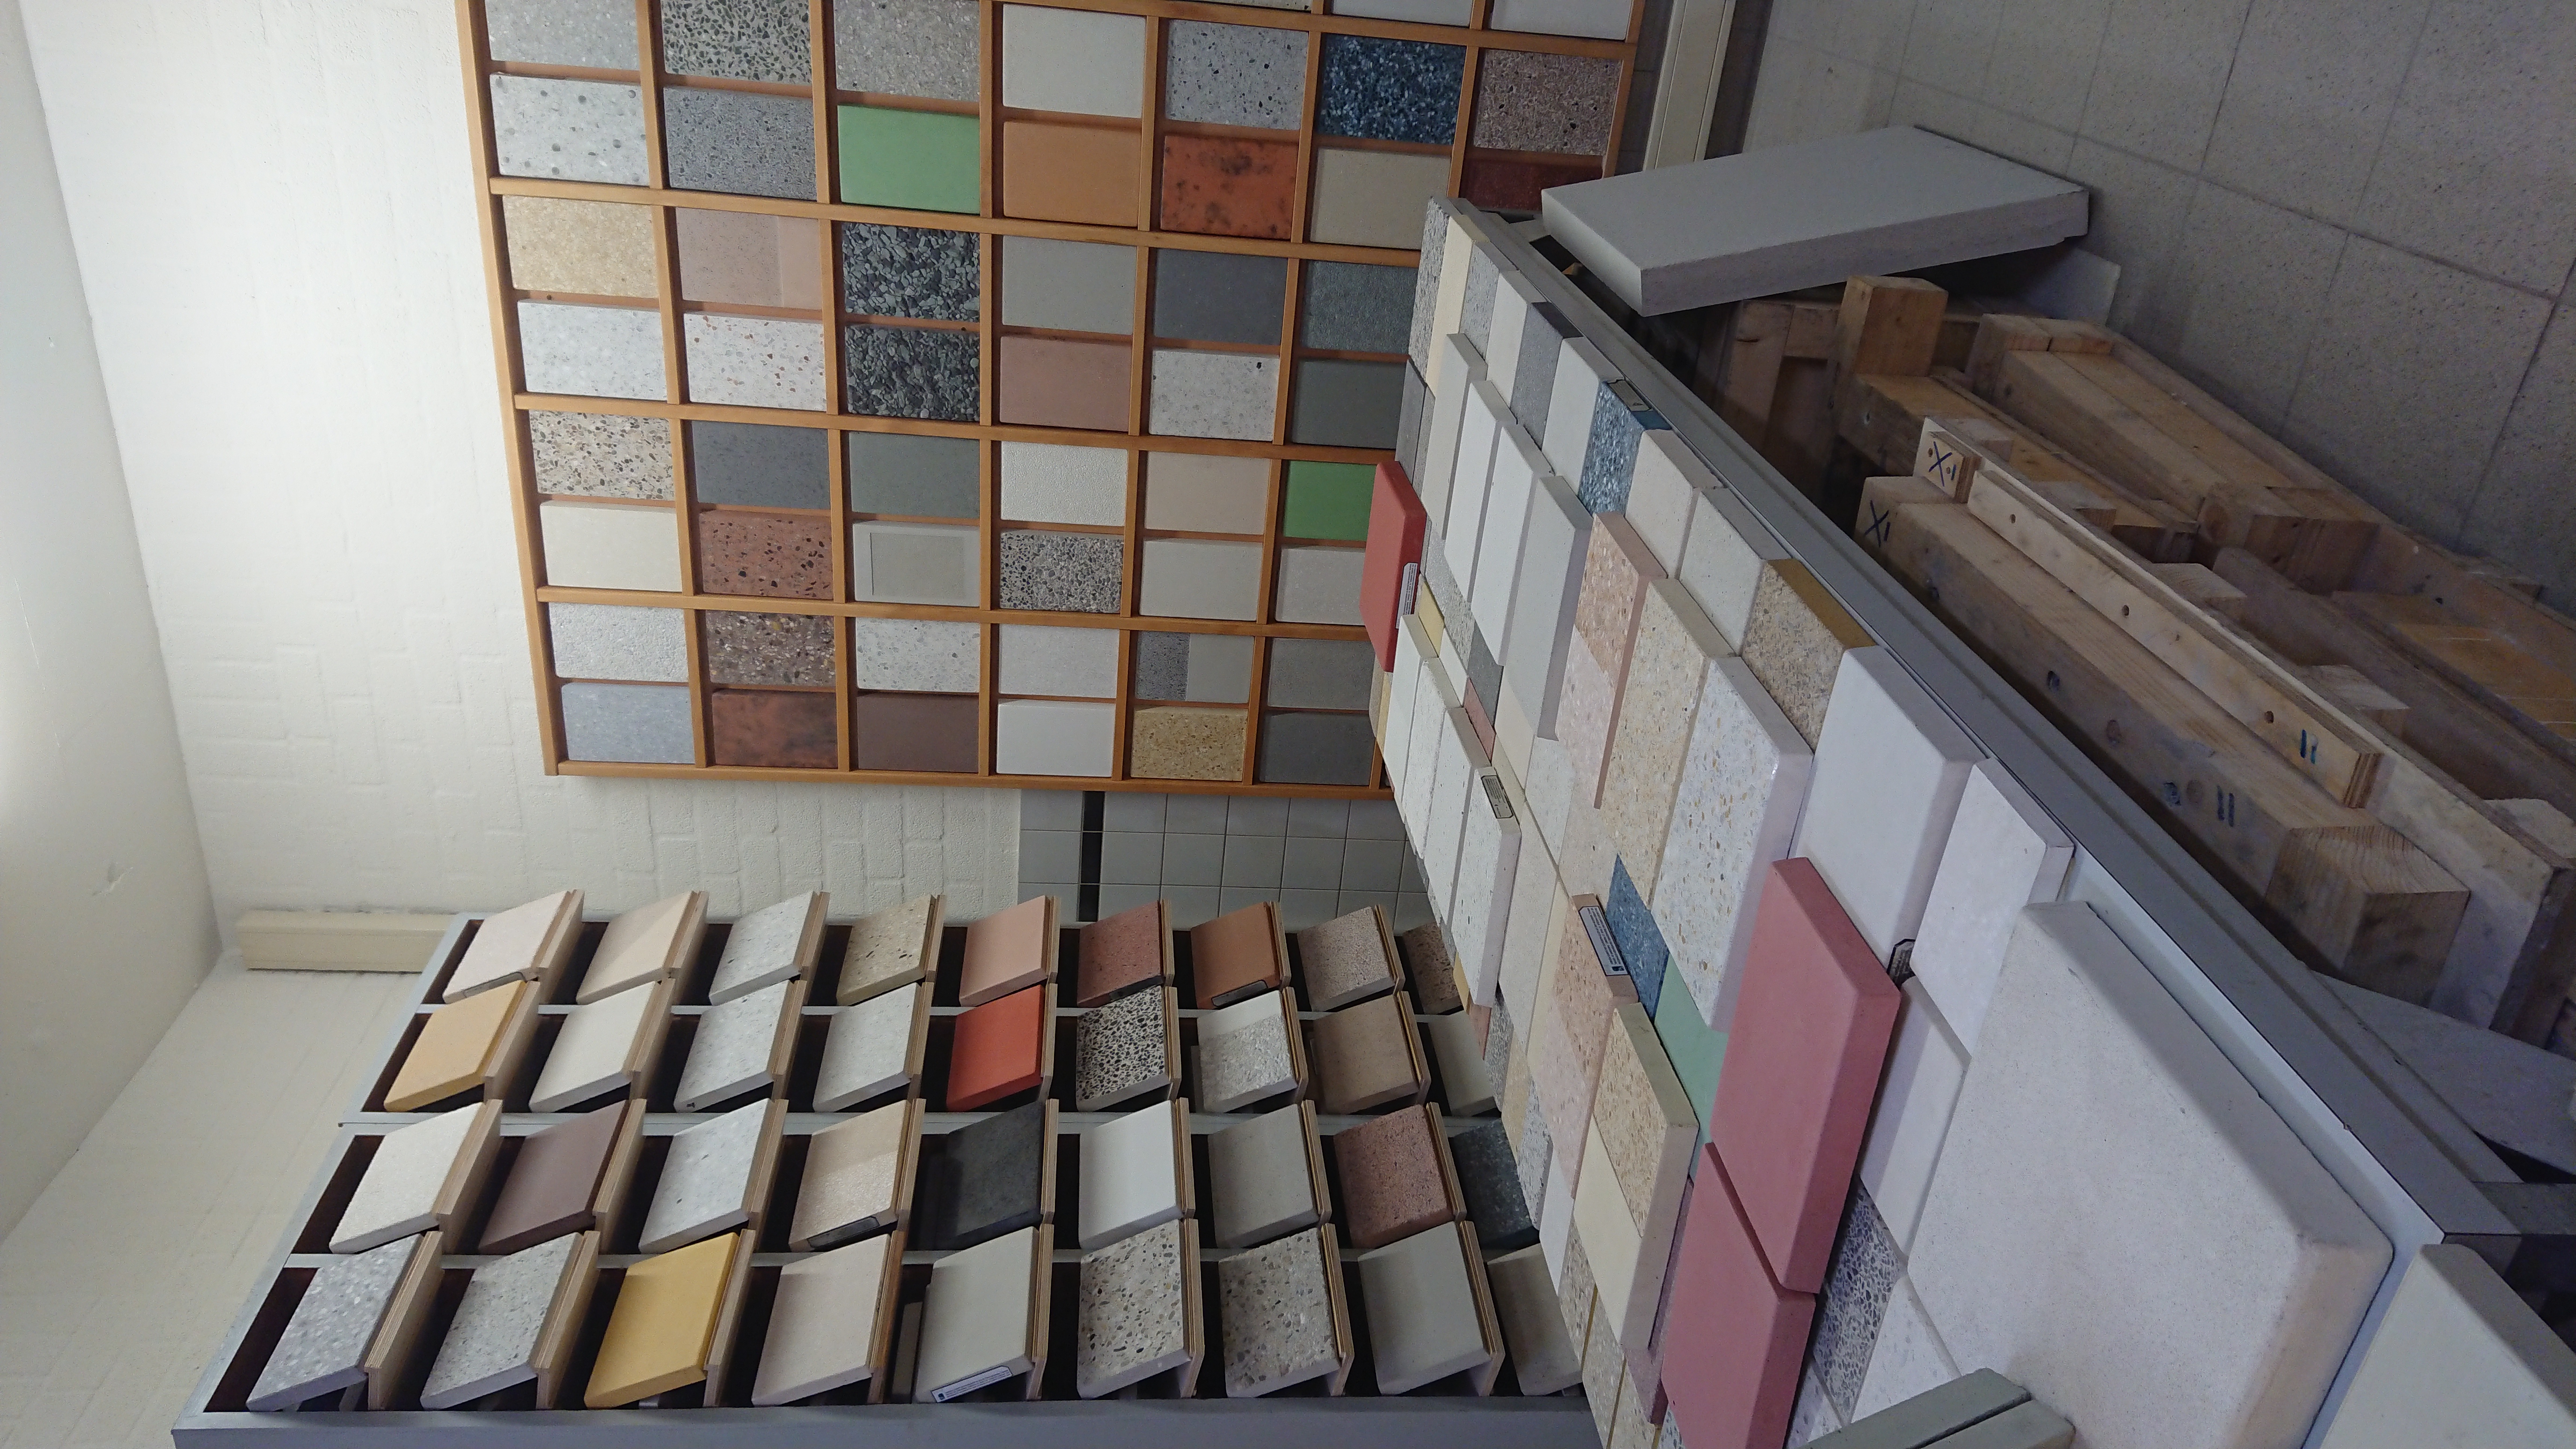 The various examples of kinds and colours of concrete available!